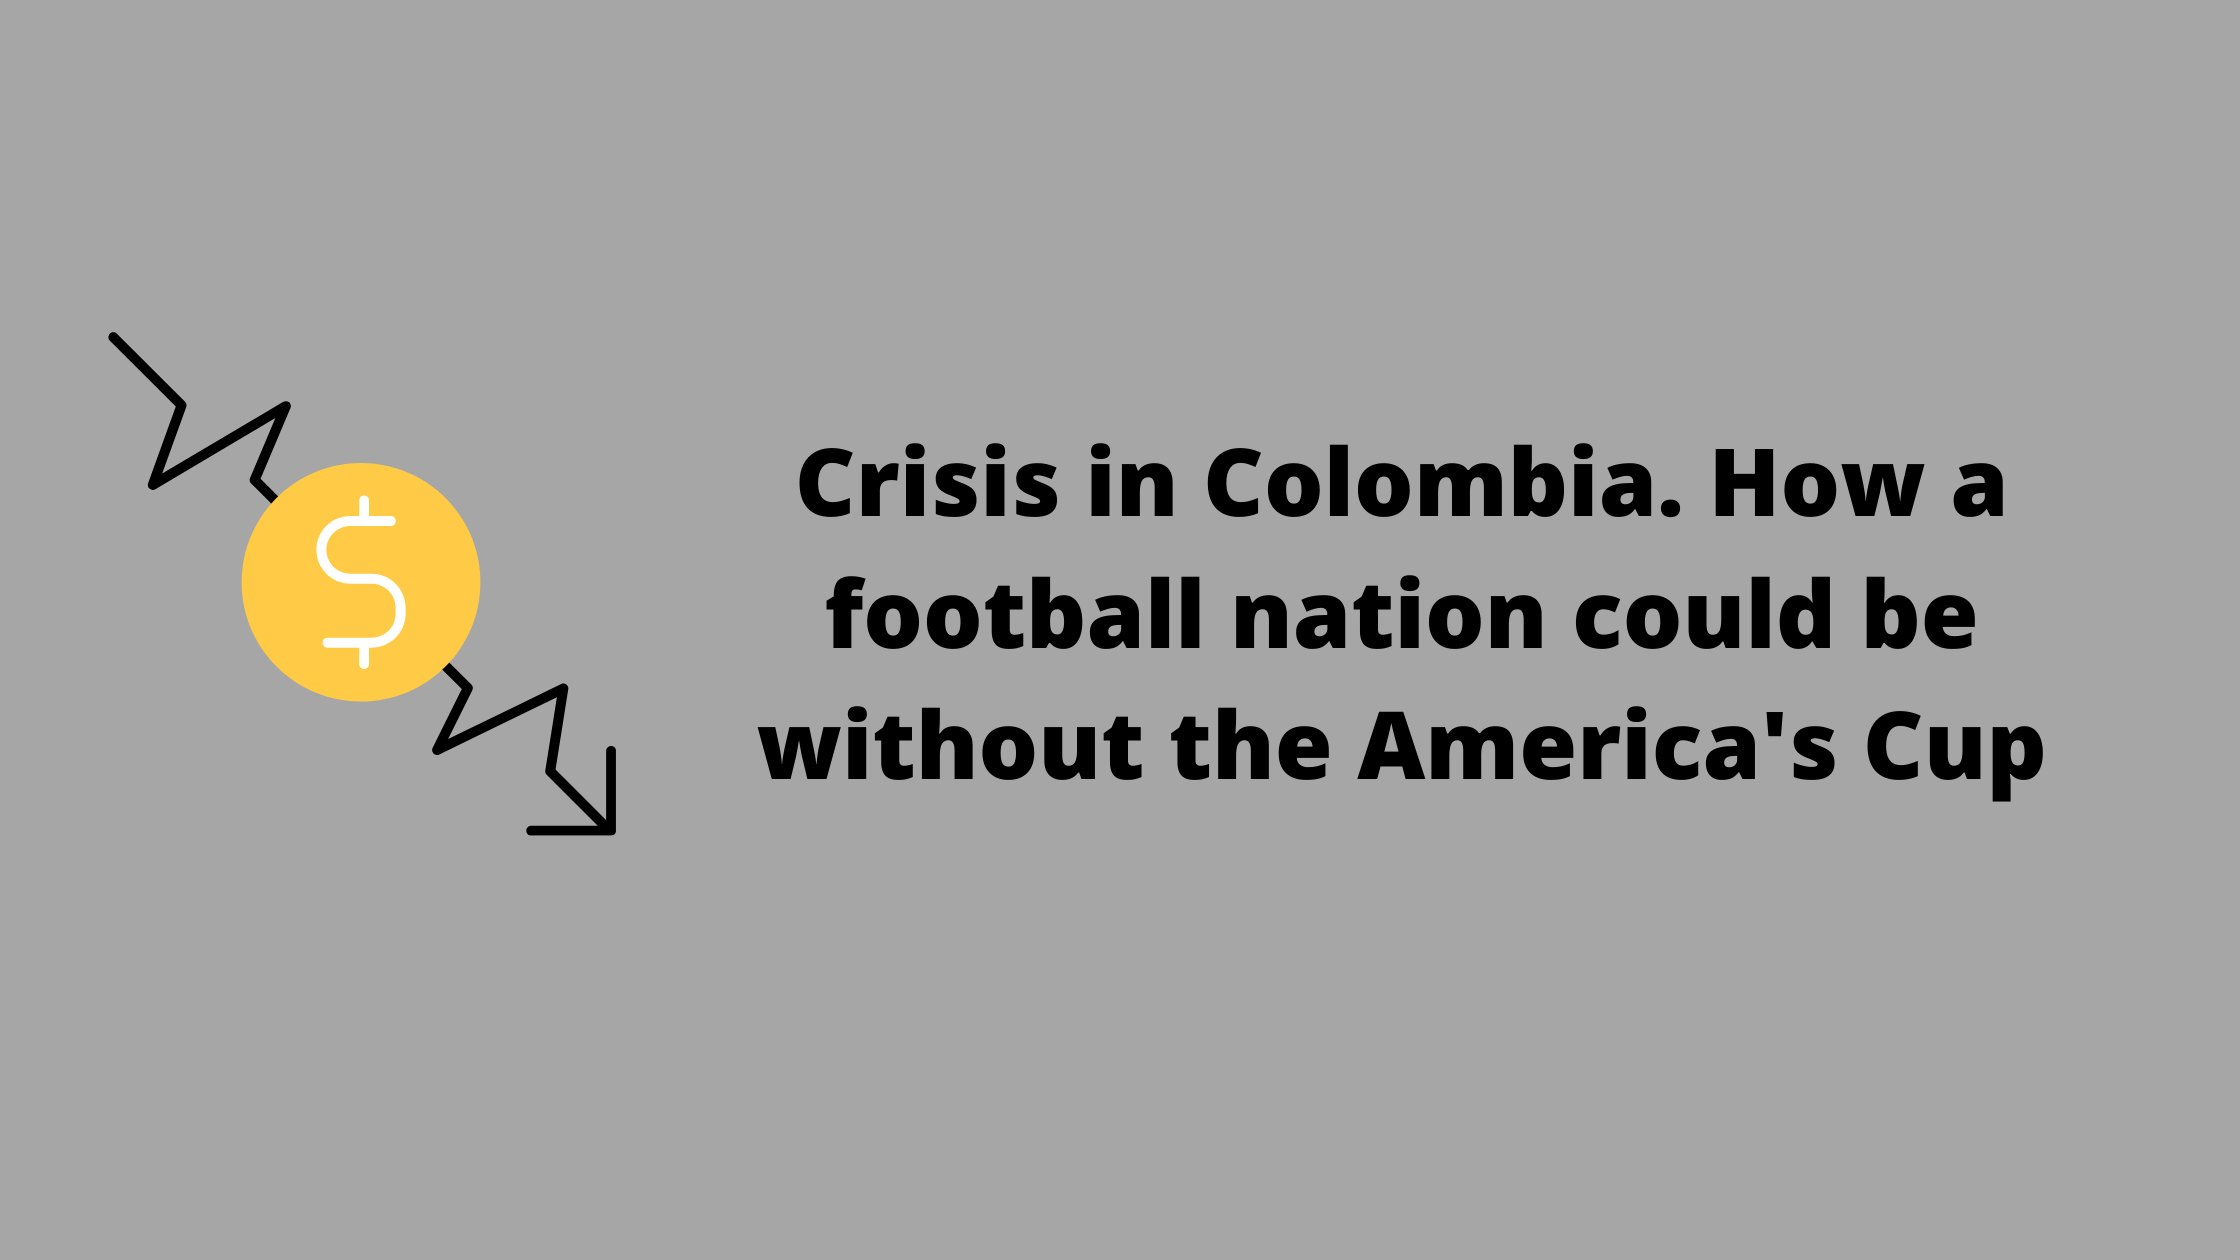 Crisis in Colombia. How a football nation could be without the America’s Cup